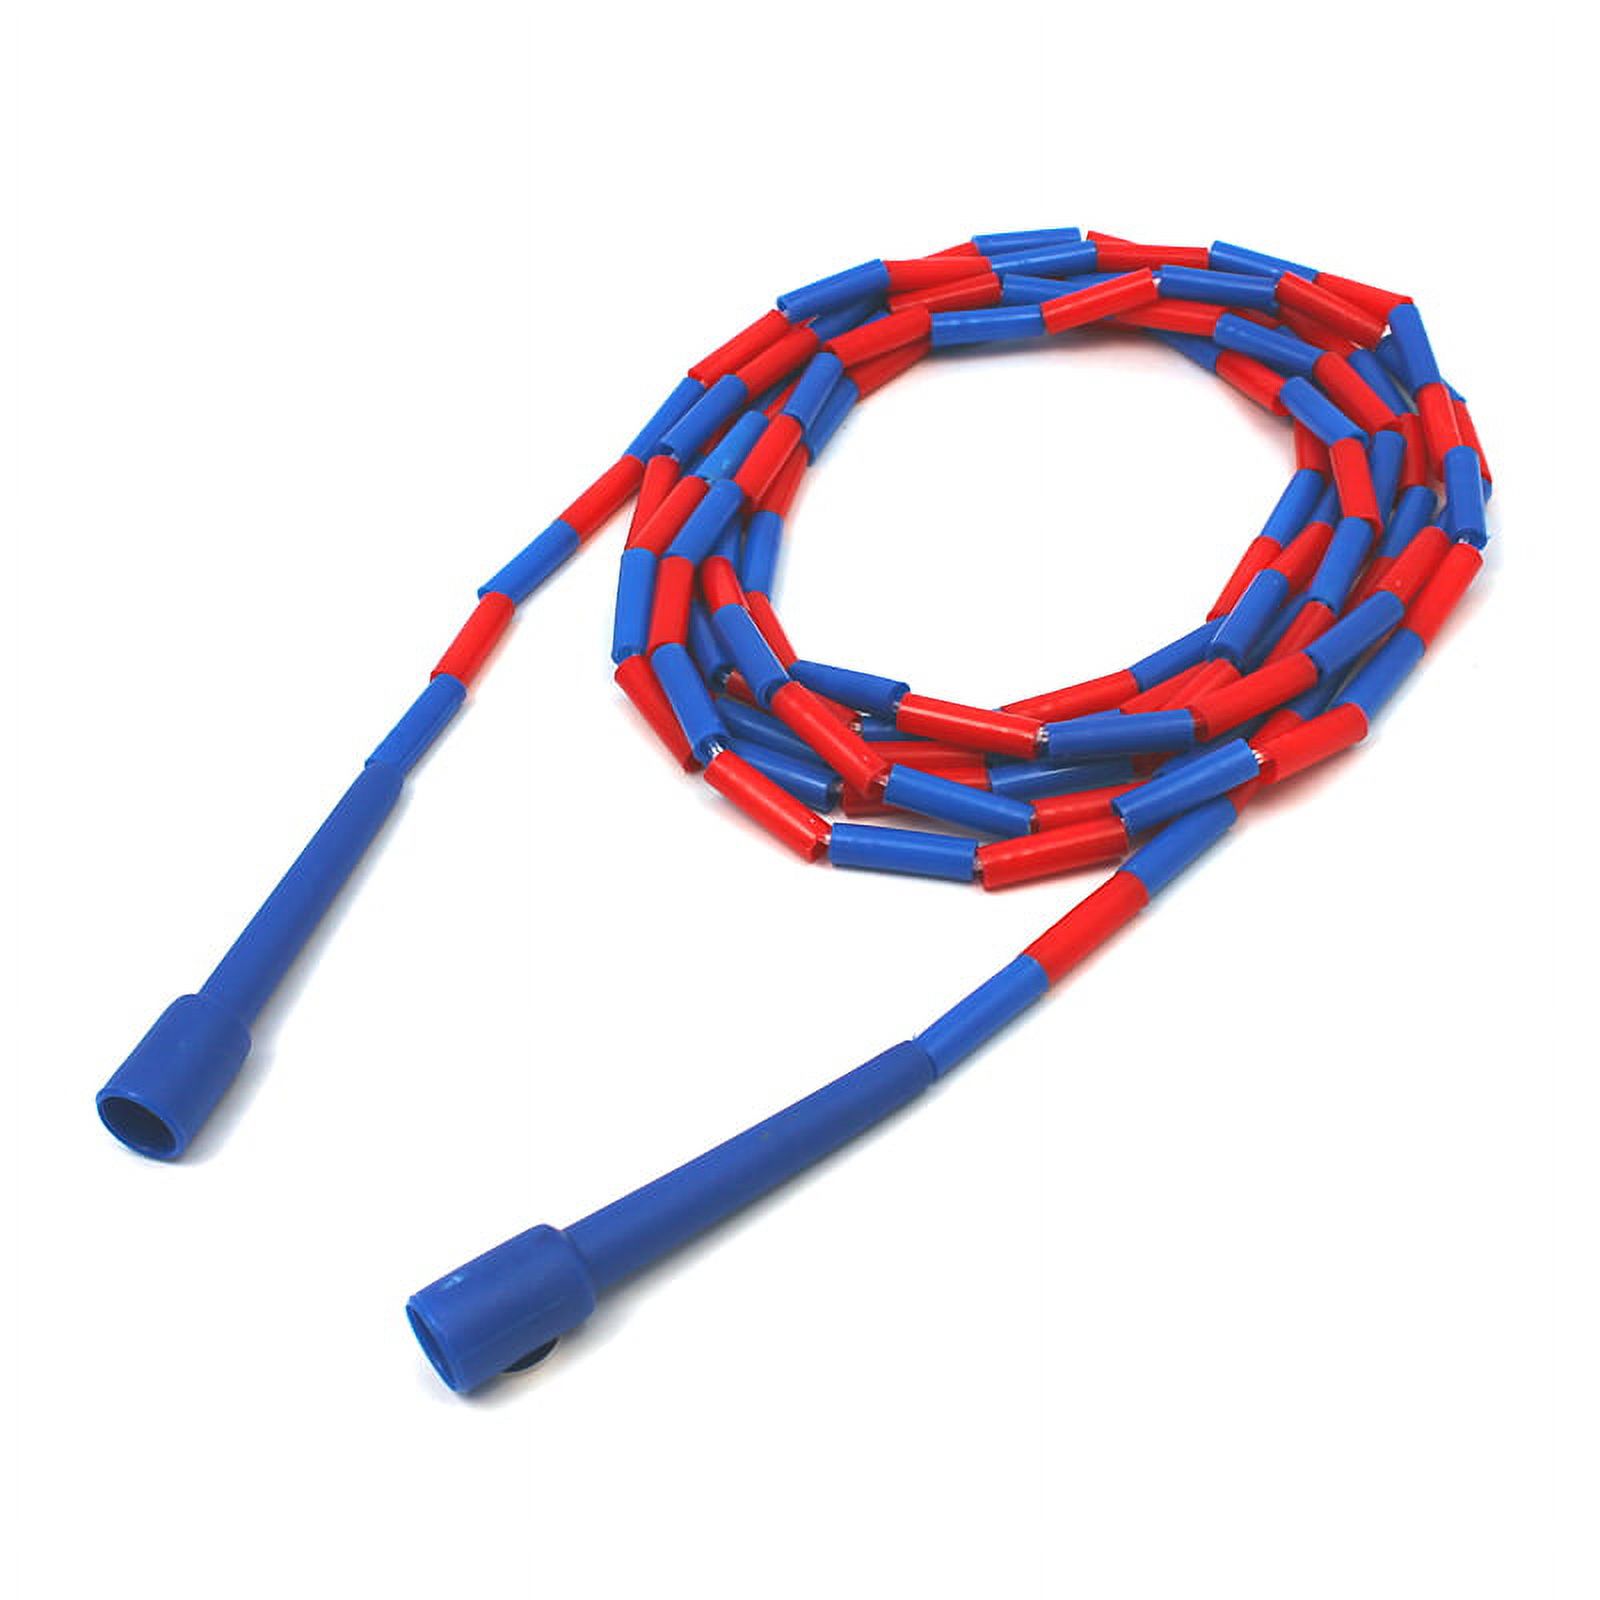 Dick Martin Sports Dick Plastic Jump Rope 16 Sections 4 EA/BD MASJR16 - image 2 of 2